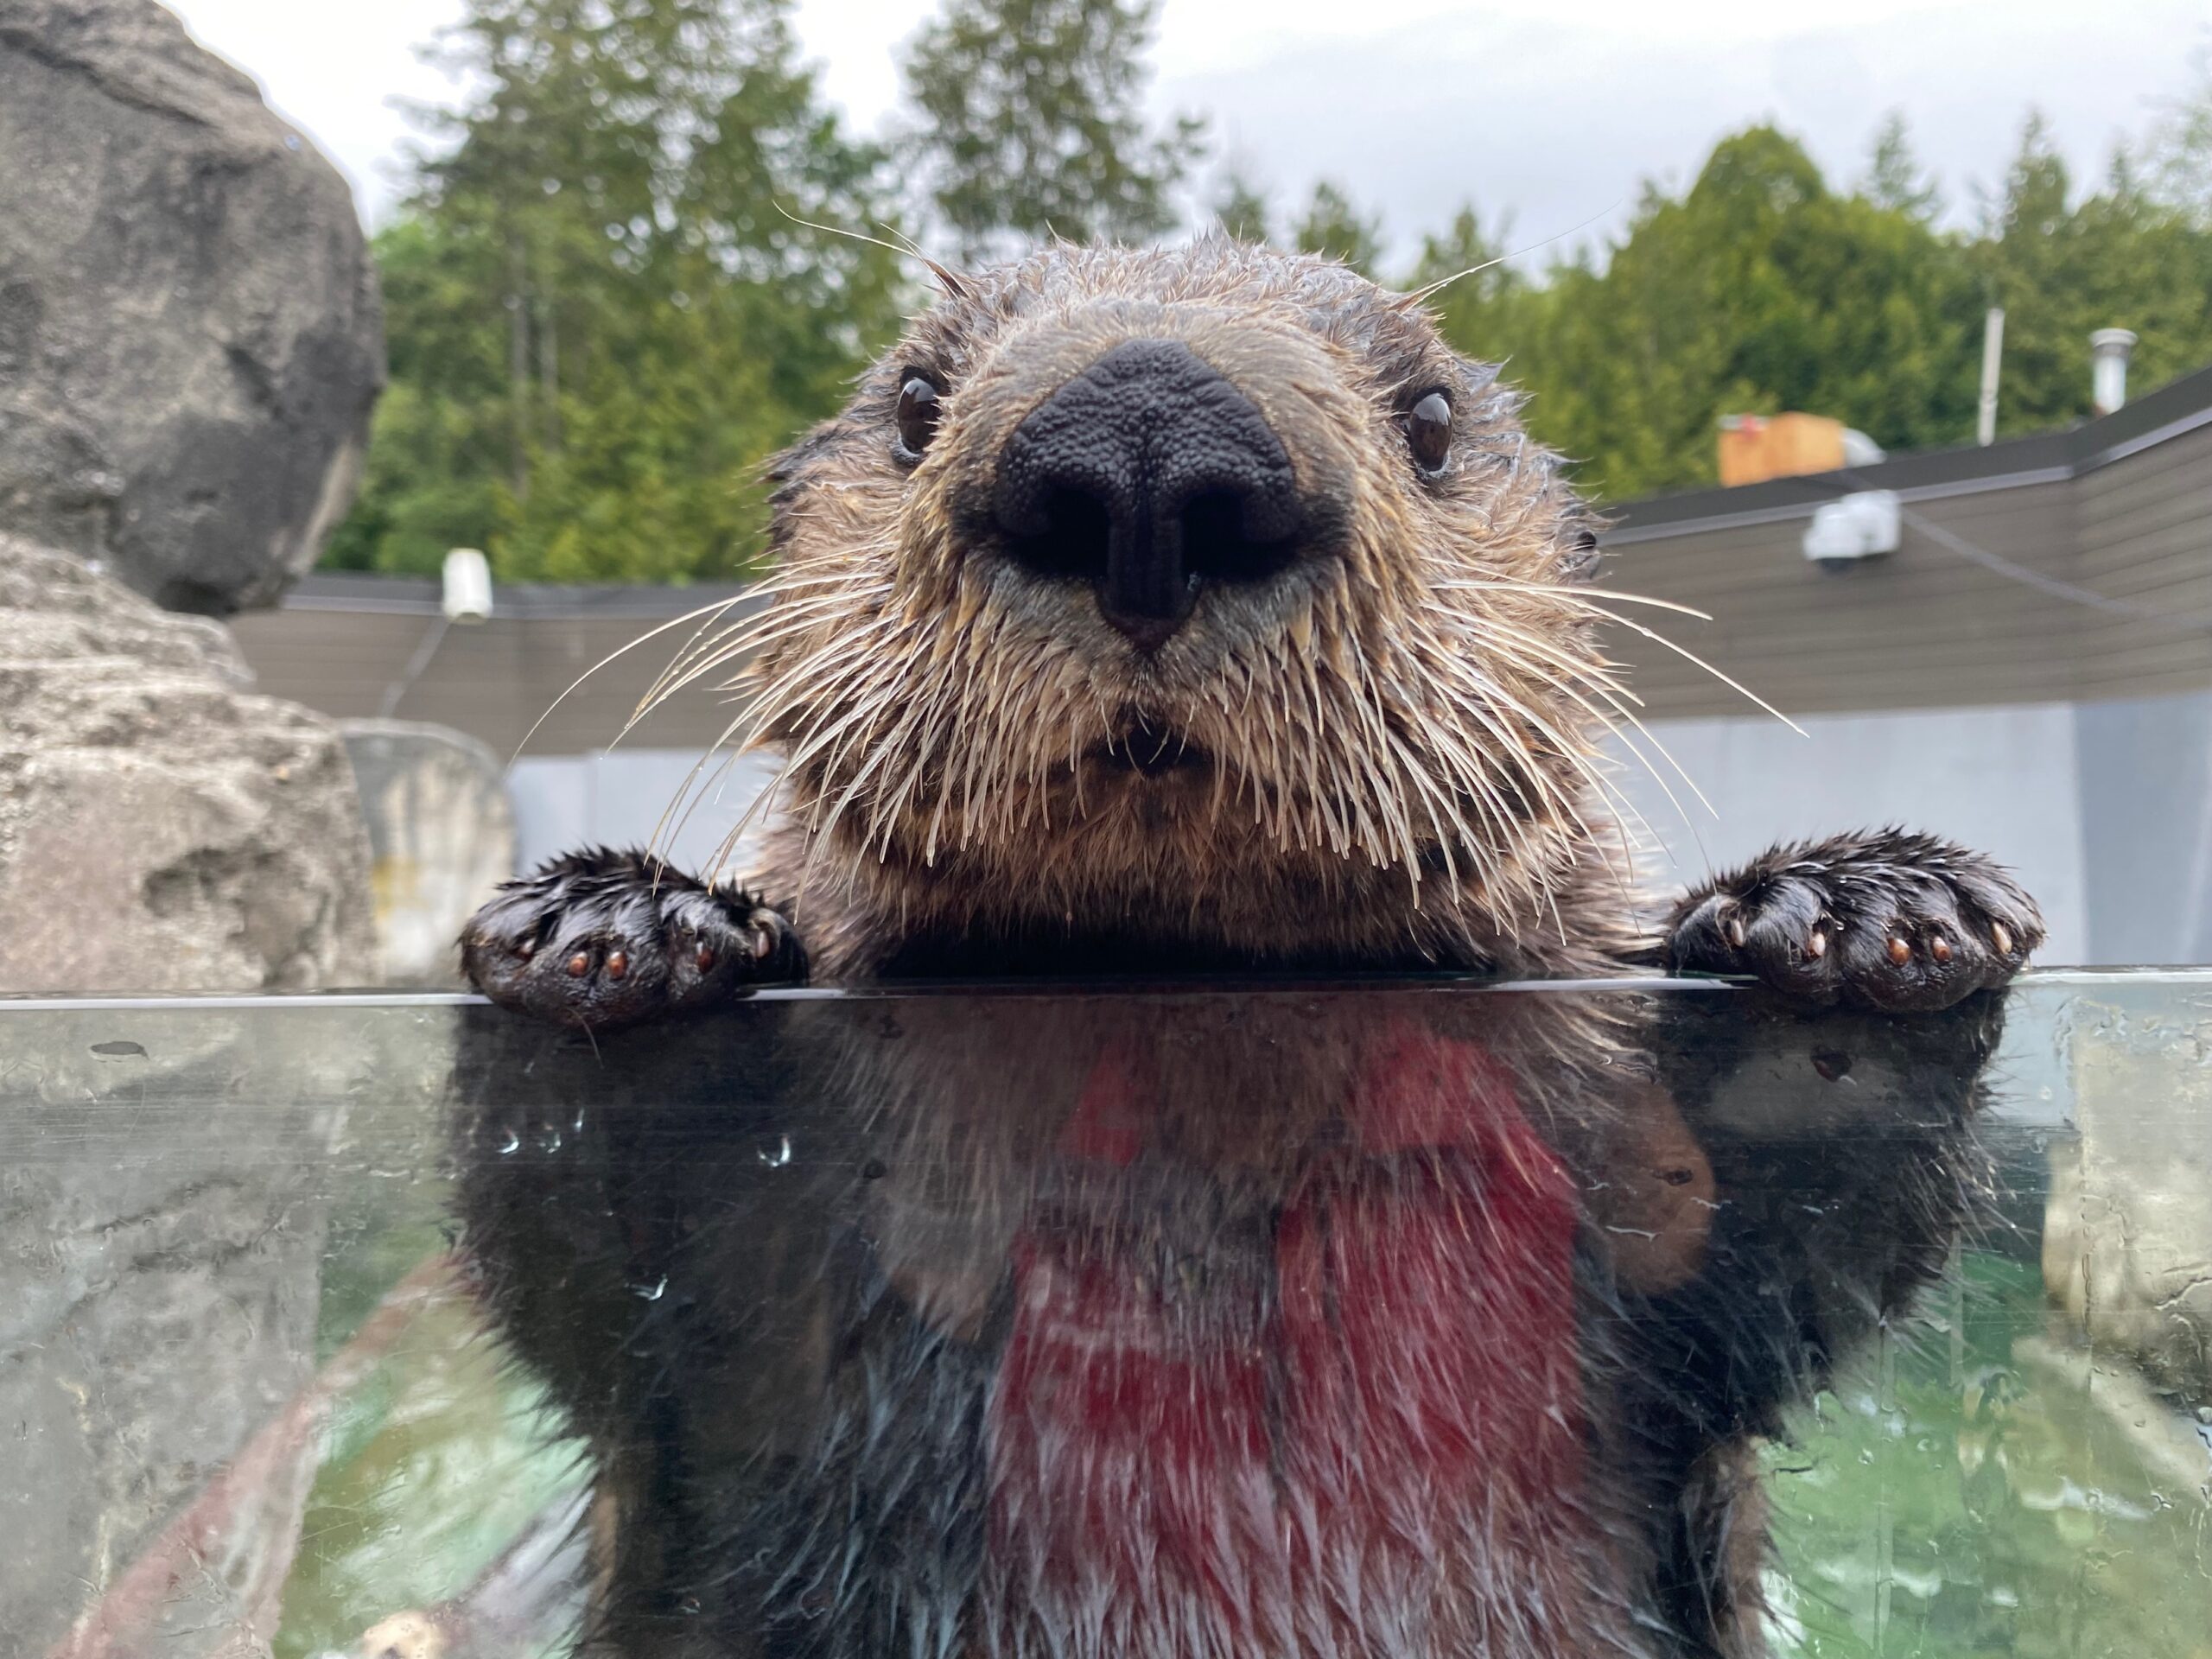 otter standing in water tank with his hands on glass.